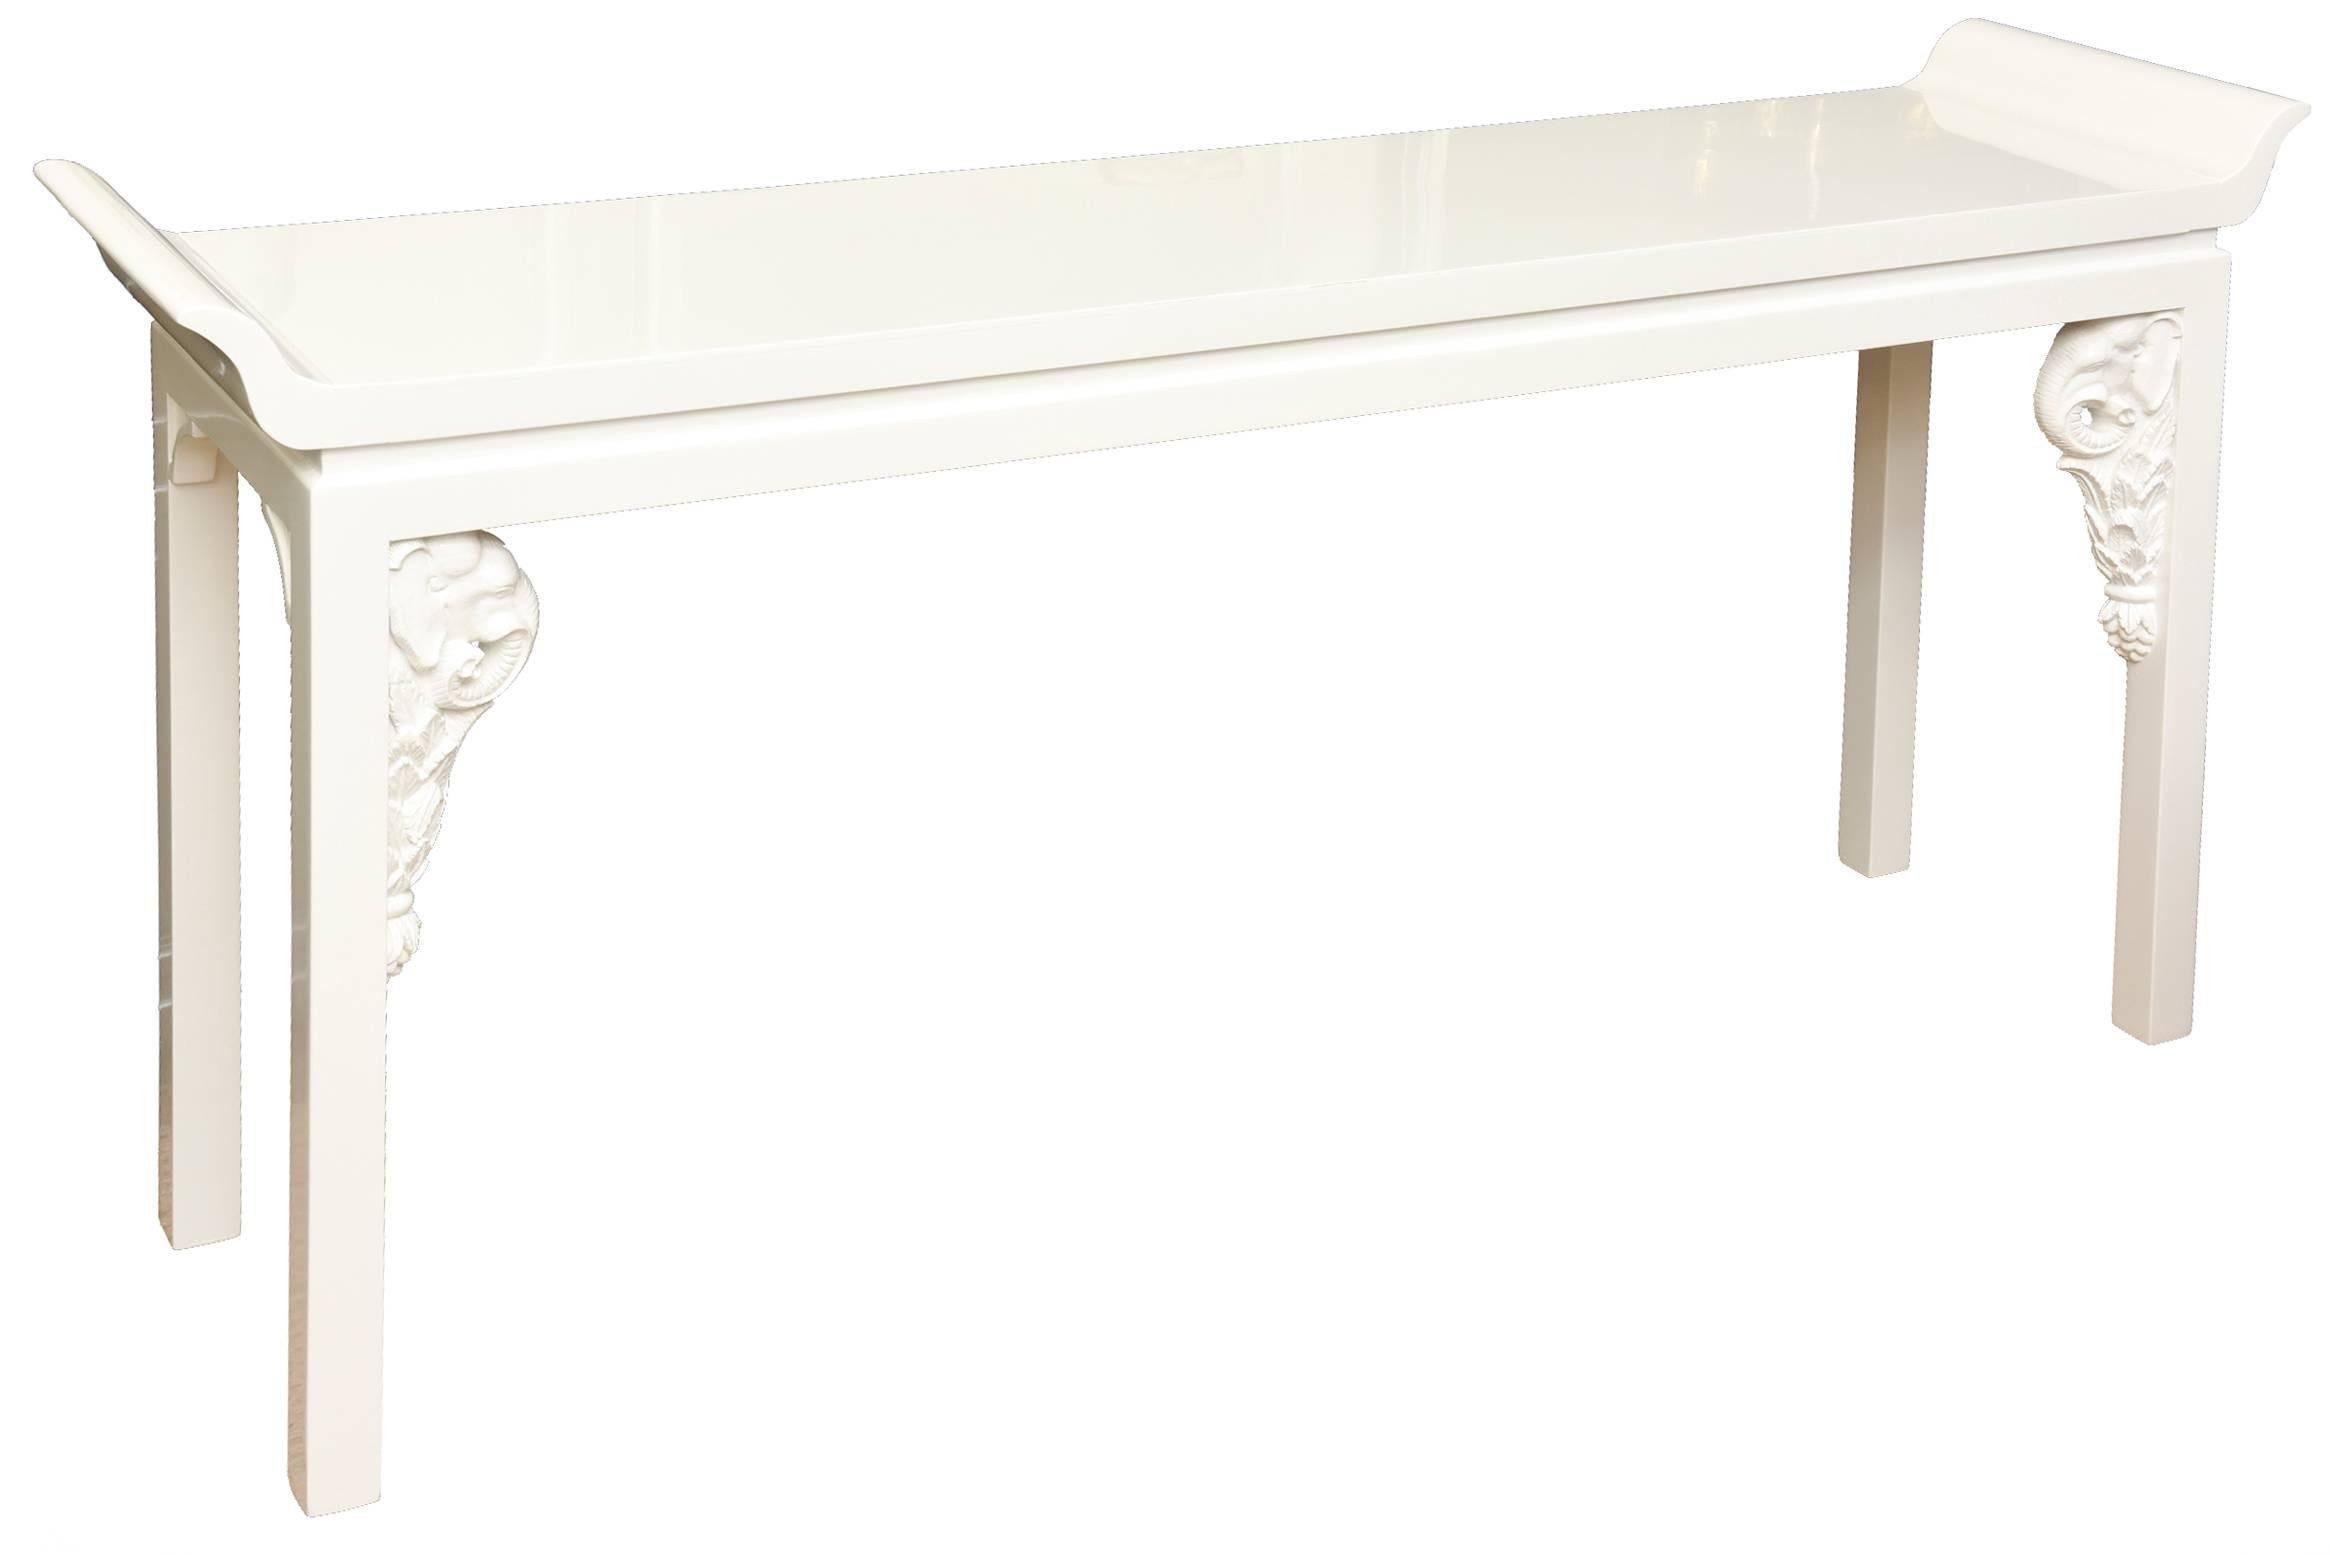 Hollywood Regency Vintage White Lacquer Draper Style Console with Pair of Matching Benches